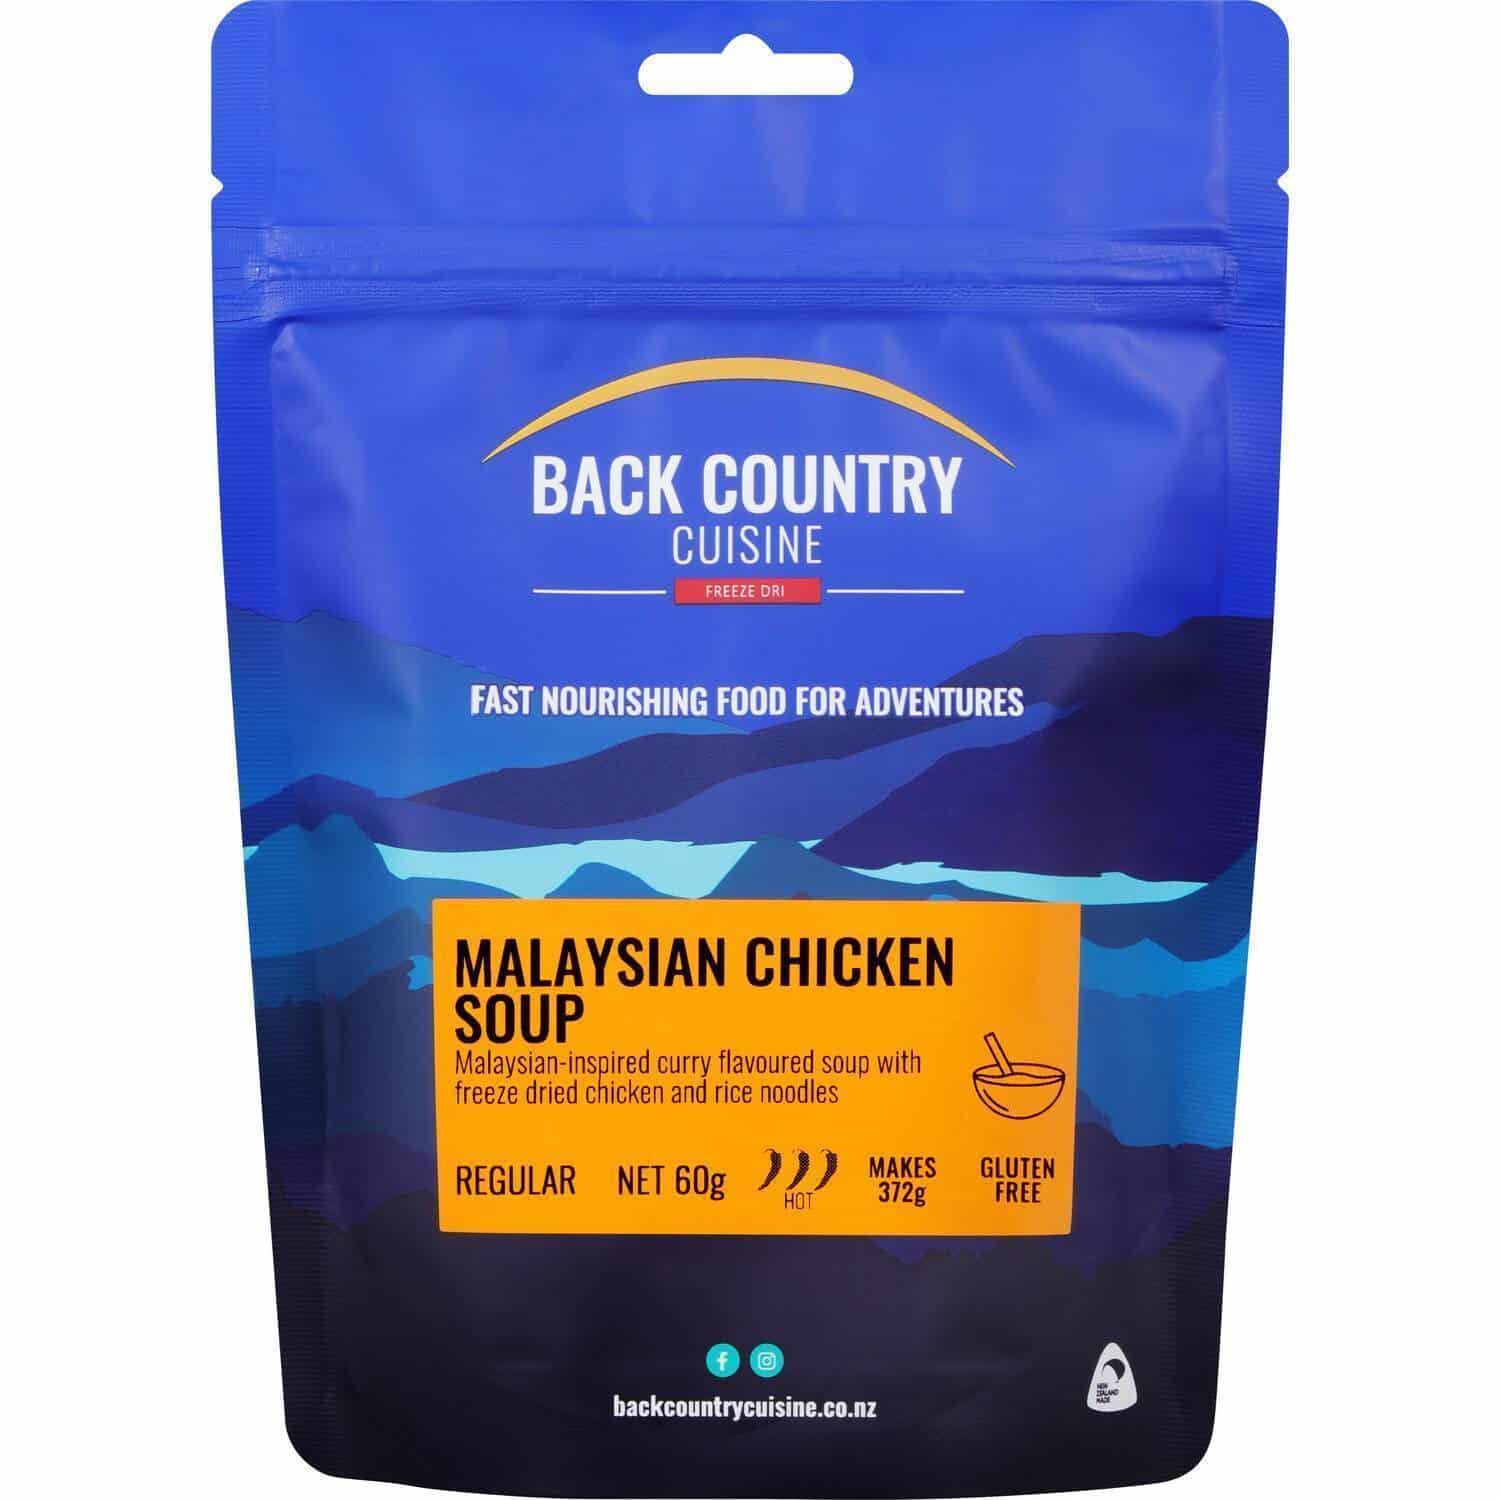 Back Country Cuisine Malaysian Chicken Soup - Tramping Food and Accessories sold by Venture Outdoors NZ